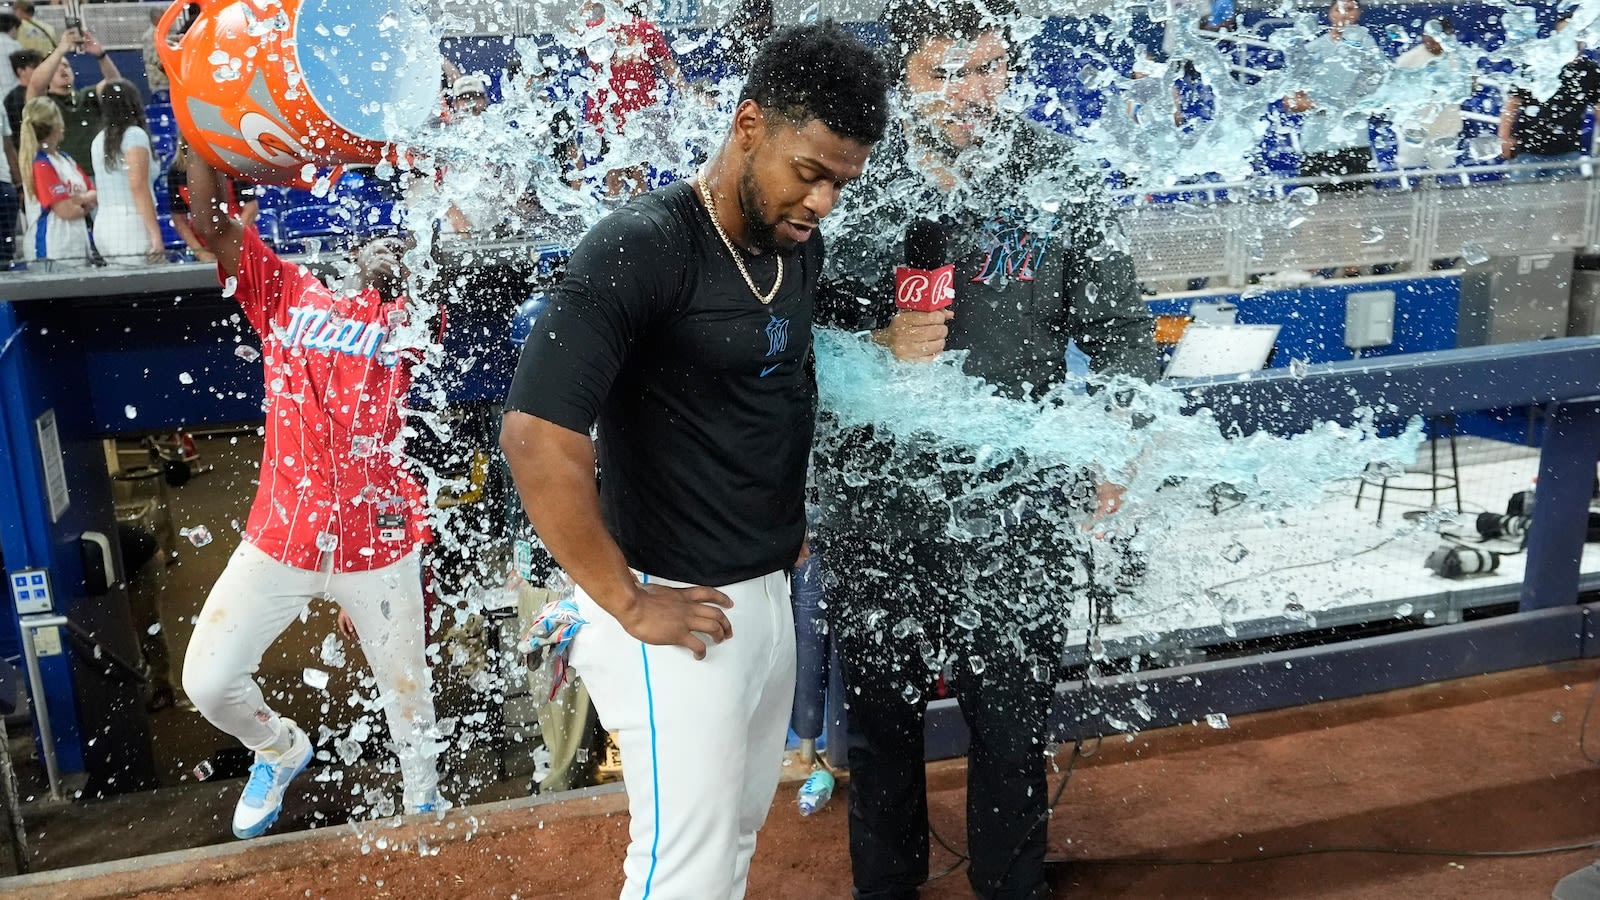 Bell hits tying homer as Marlins score 4 in 9th off struggling Díaz and rally past Mets 10-9 in 10